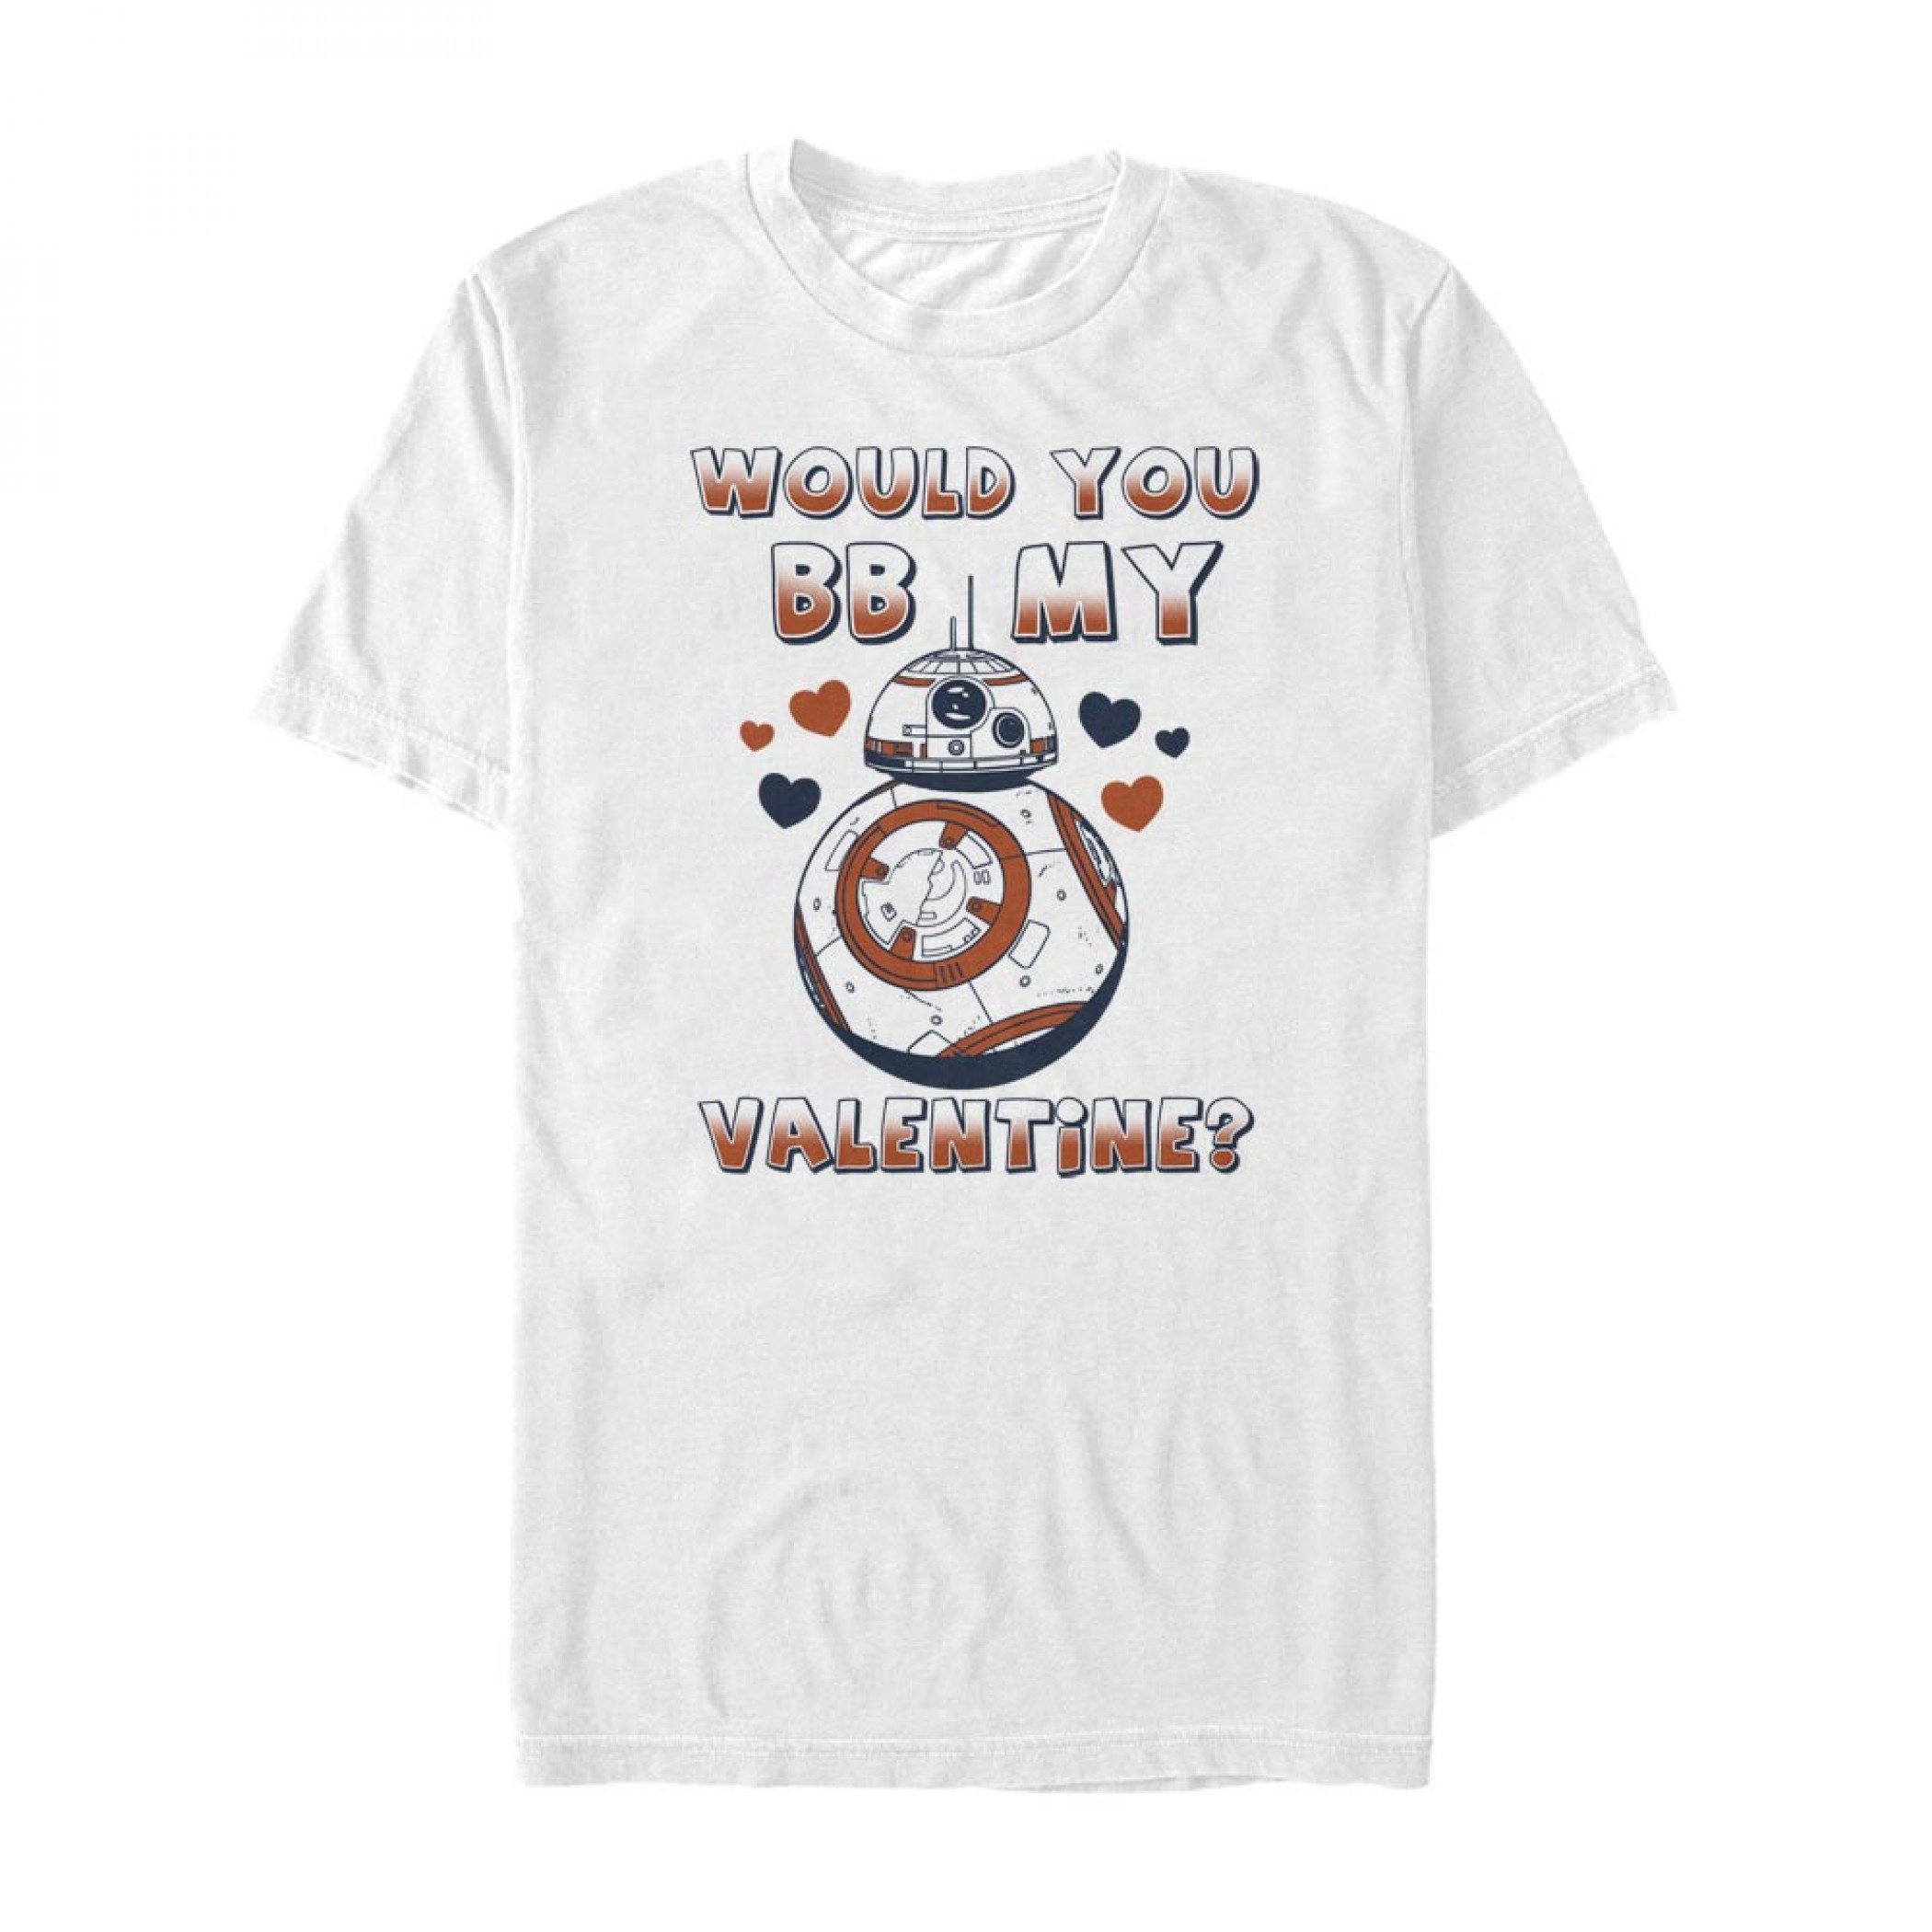 Star Wars Would You BB-8 My Valentine? White T-Shirt